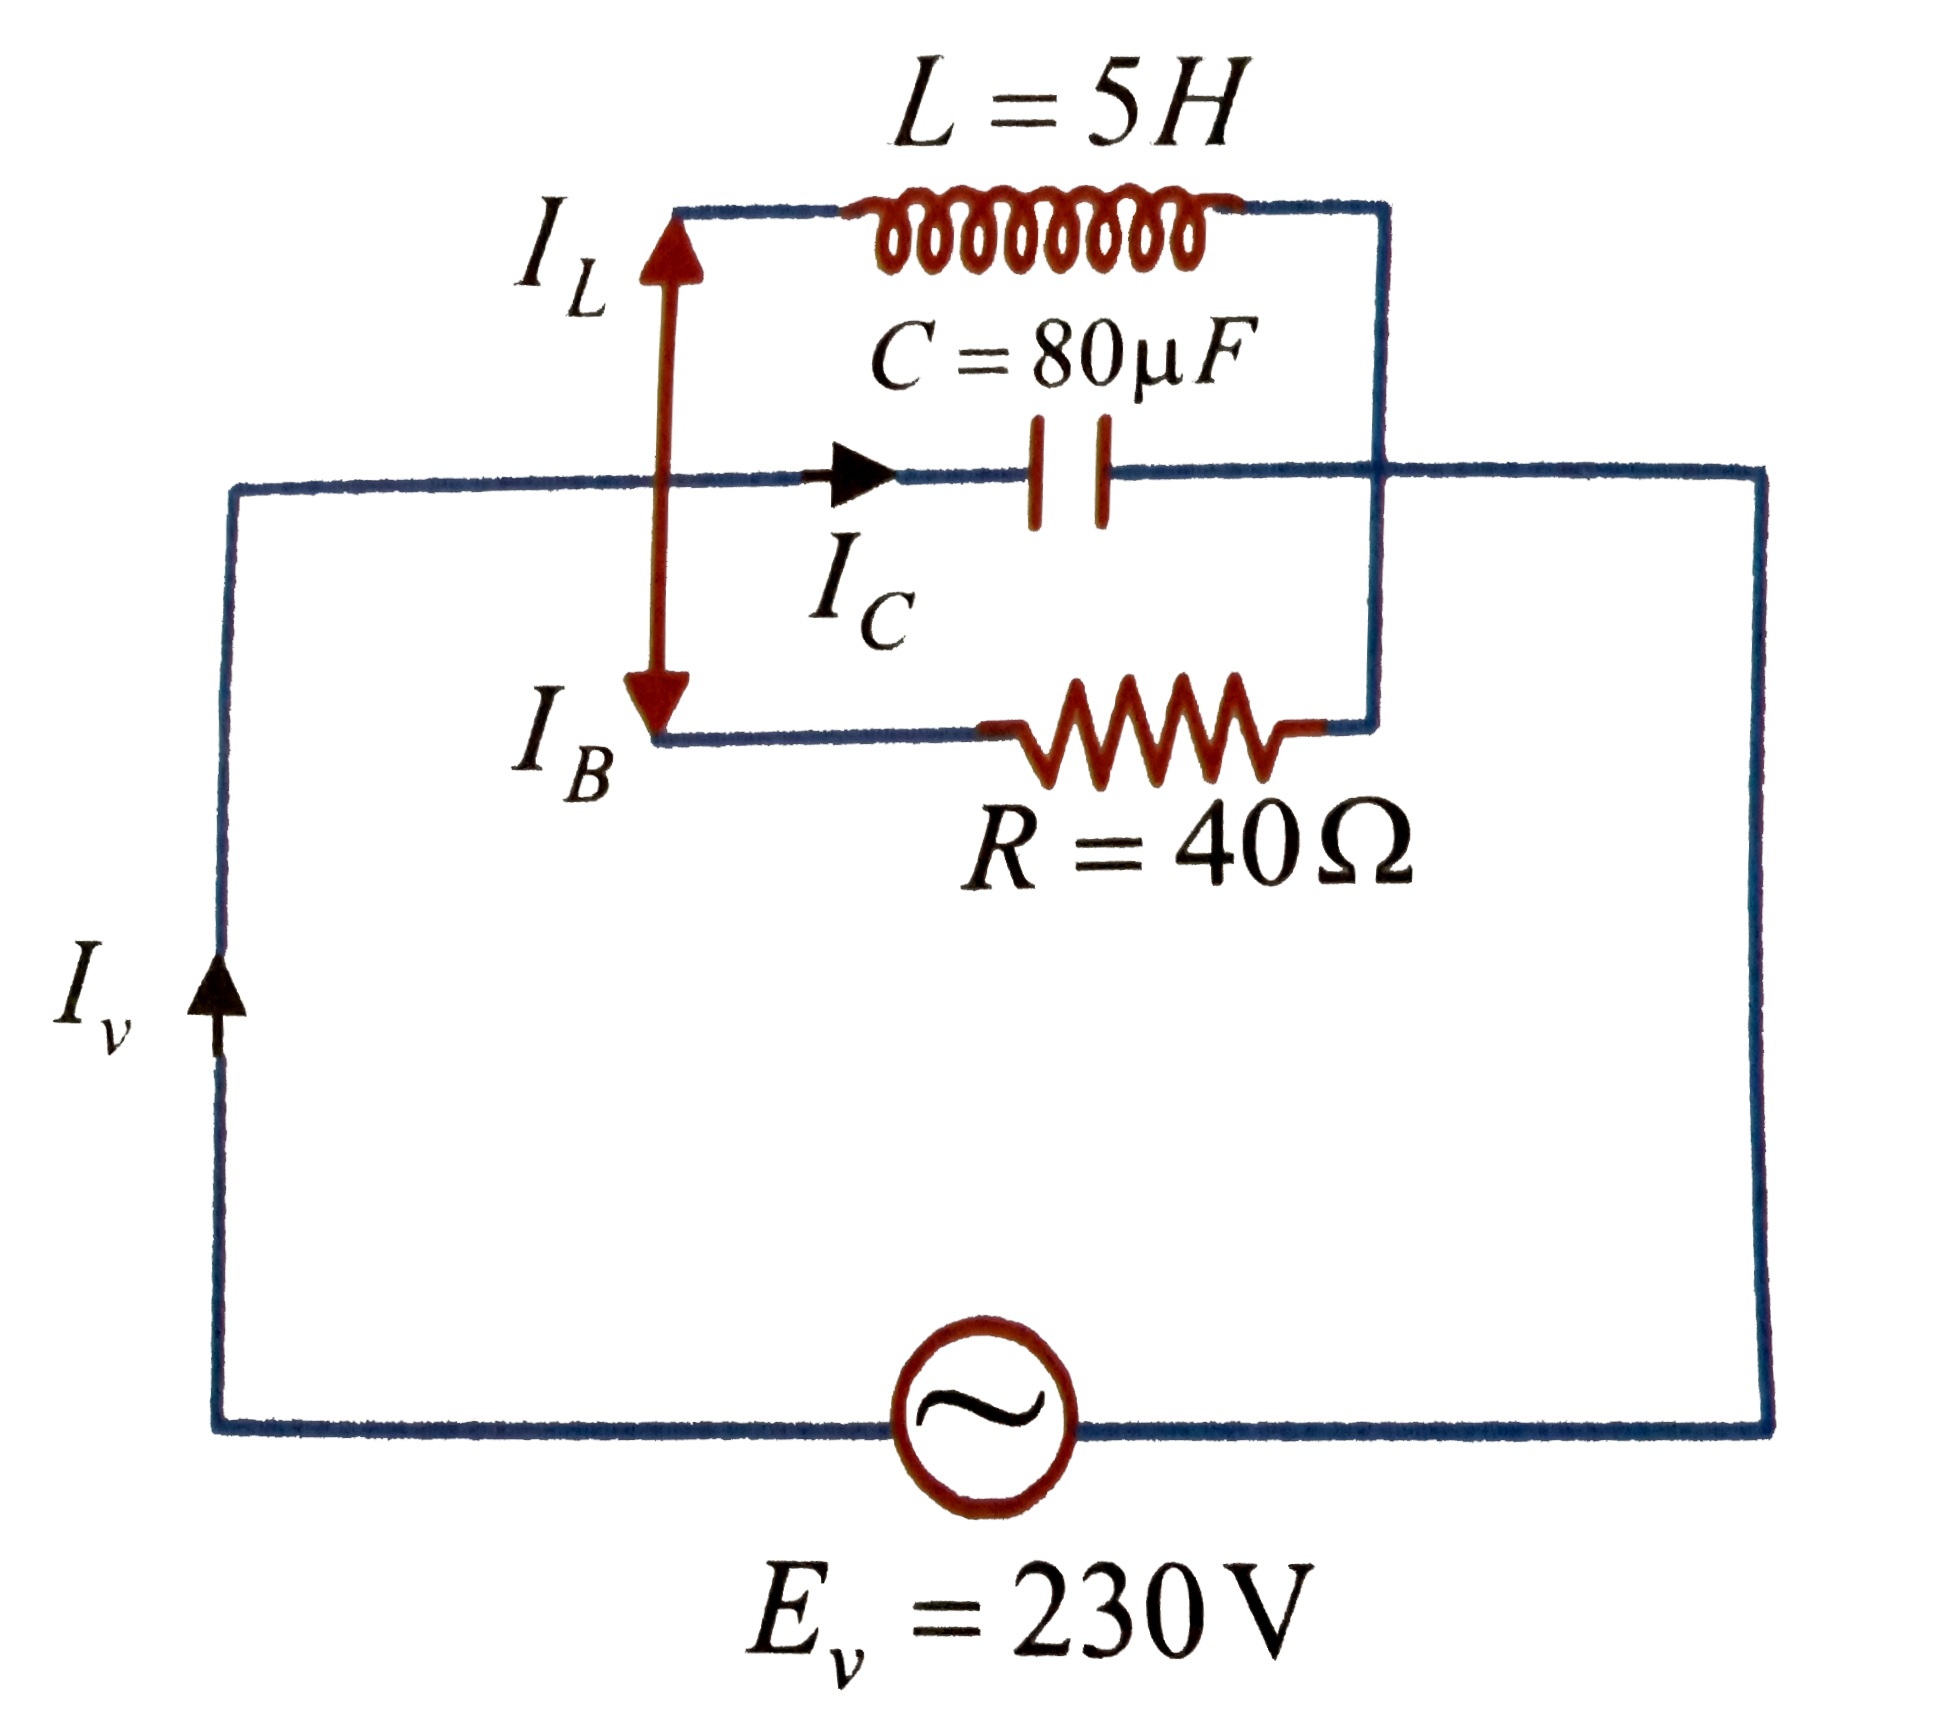 If the three elements, L,C and R are arranged in parallel. Source has emf 230 V and L = 5.0 H, C = 80 mu F and R = 40 Omega